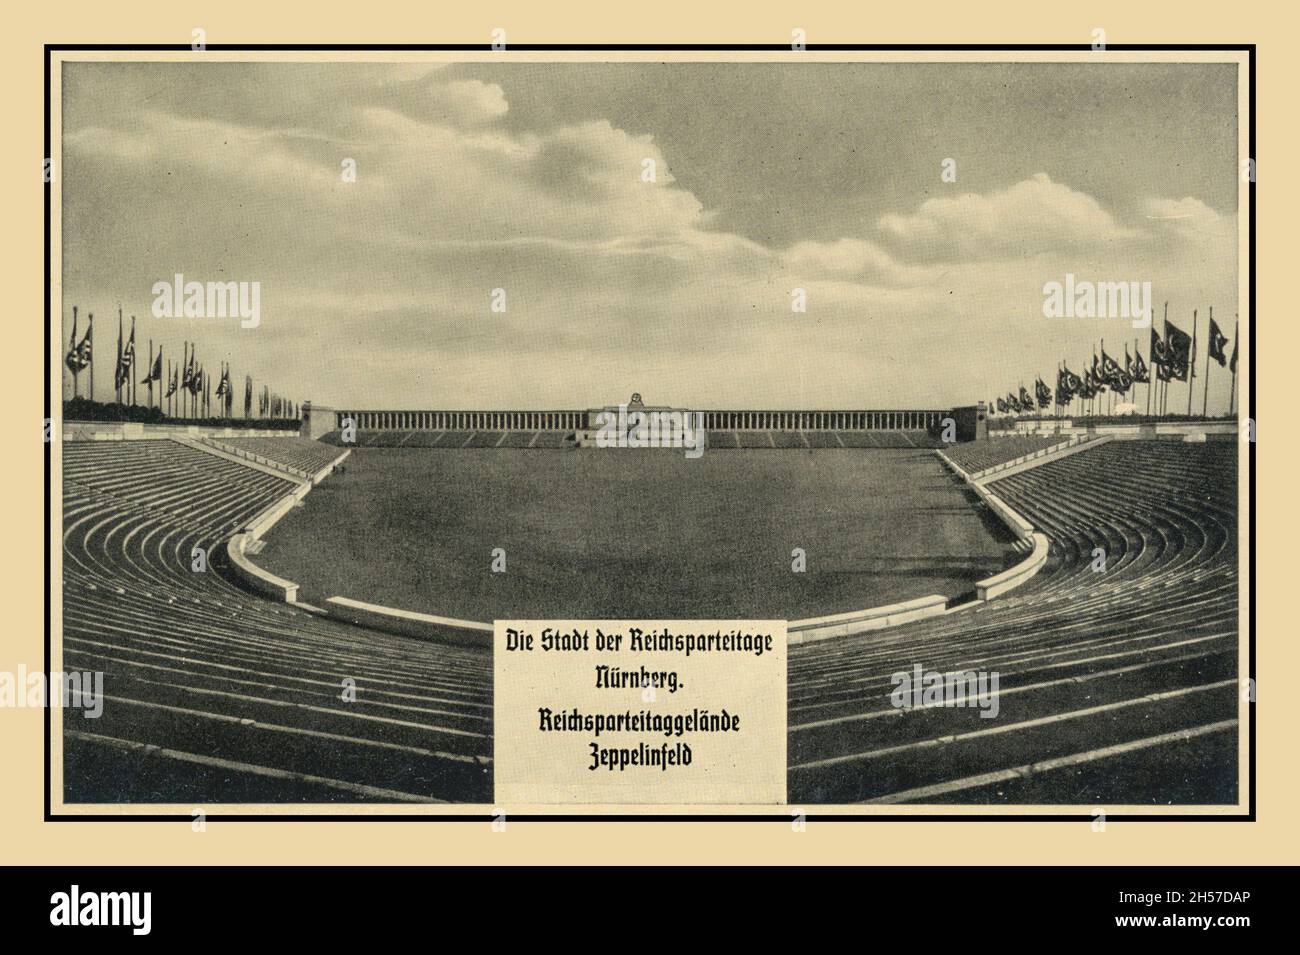 1930s The Nazi Stadium 'Zeppelin Field' at Nuremburg flying Nazi Swastika flags showing the vast arena seating and field where the infamous Adolf Hitler Nazi political rallies were held Nuremberg Nazi Germany Stock Photo